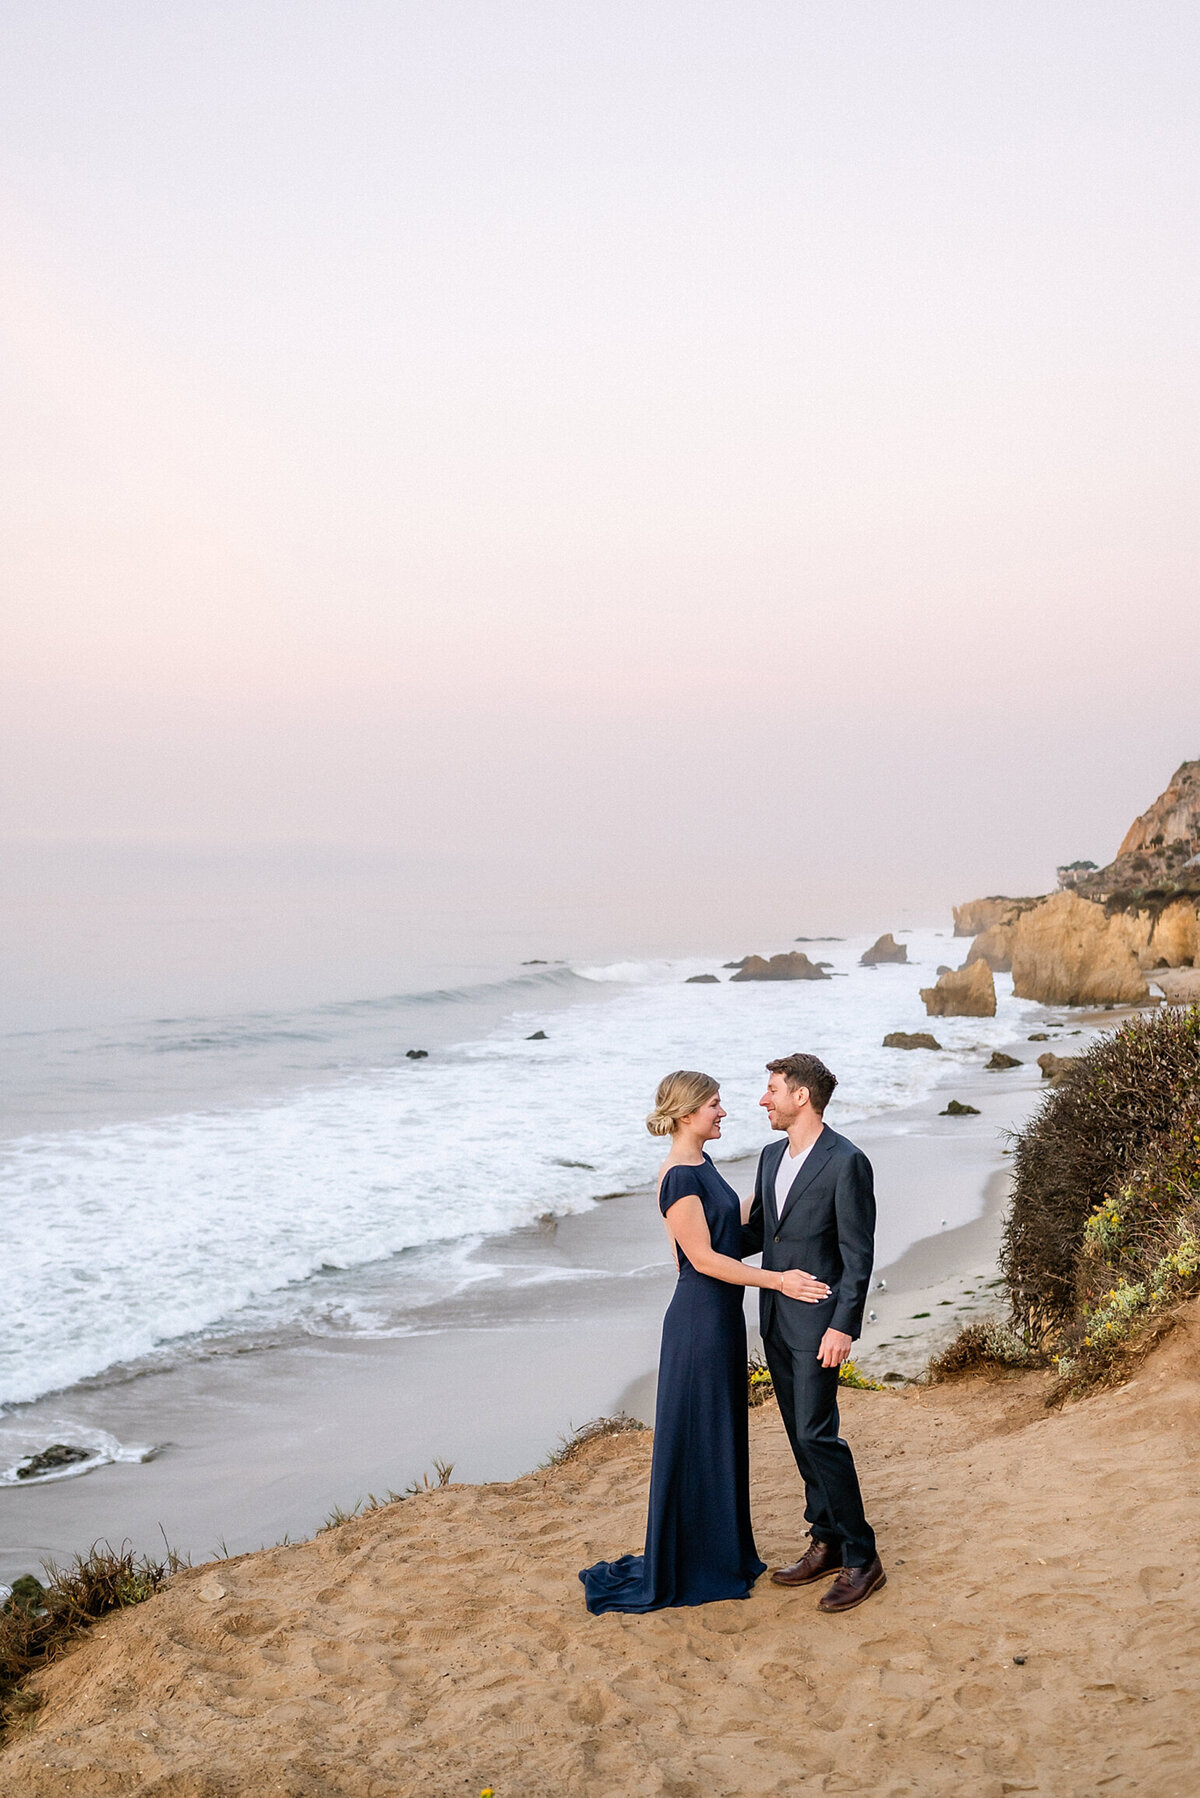 Engaged Couple standing on a cliff over looking the ocean